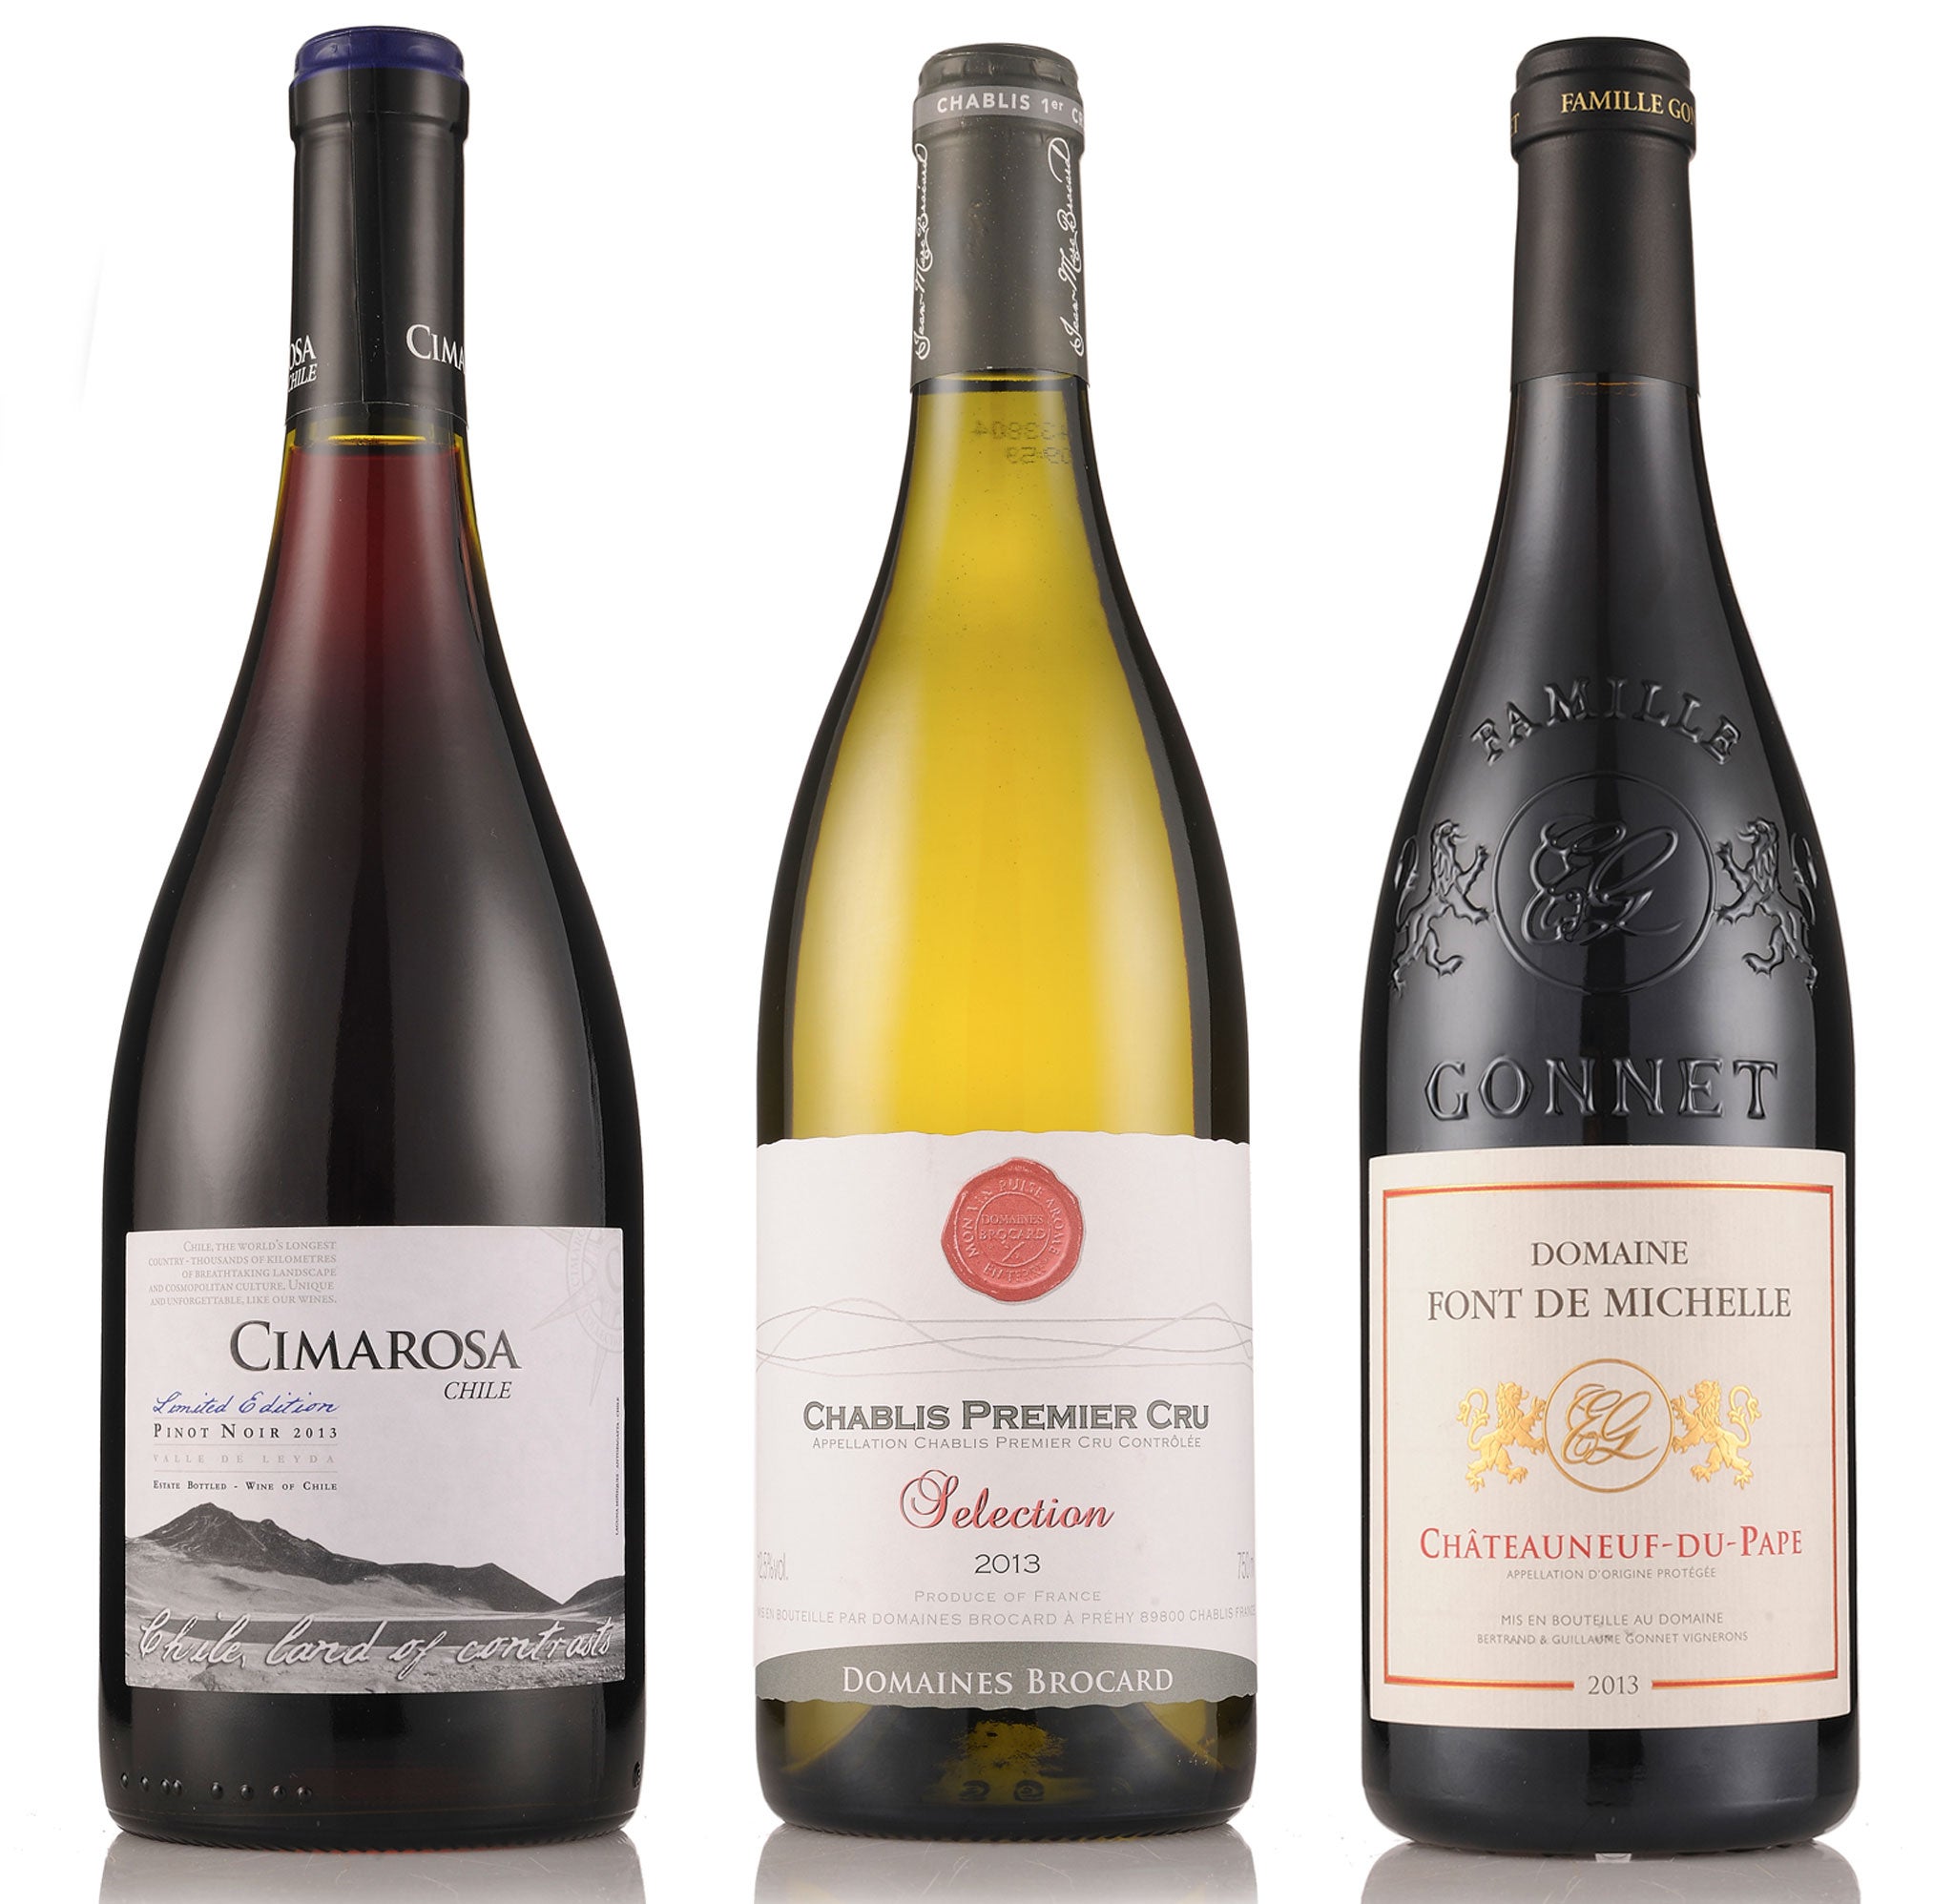 Wine 2013 Pinot Noir Limited Edition Leyda Valley 2014 Taste The Difference Chablis Premier Cru Brocard 2013 Font De Michelle Chateauneuf Du Pape The Independent The Independent